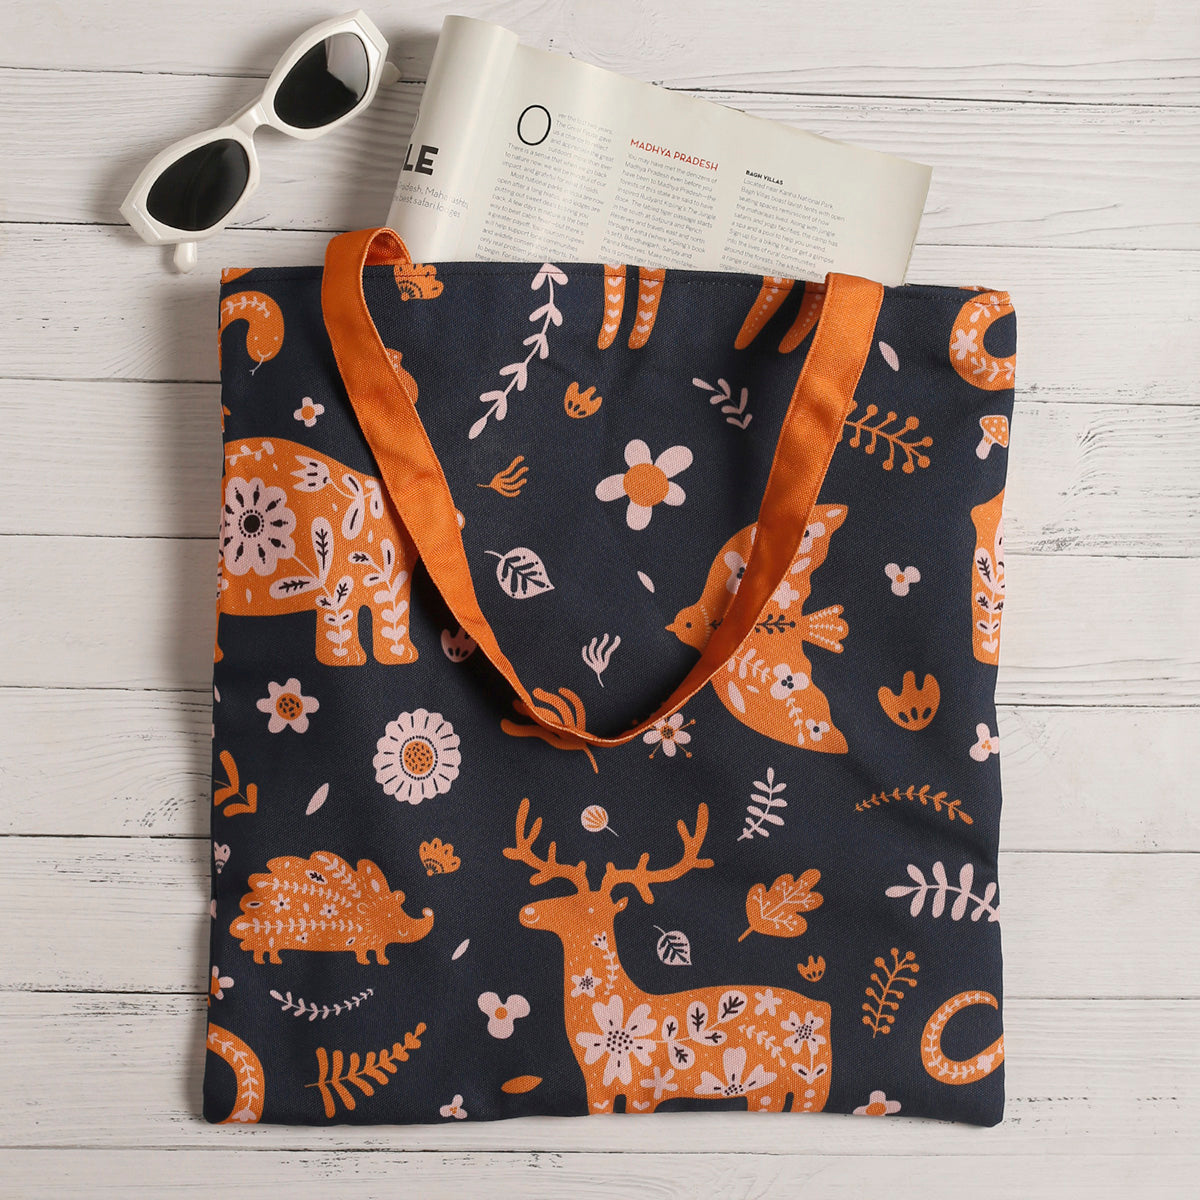 A navy blue tote bag with orange deer and floral patterns, placed on a white wooden surface, accompanied by a pair of white sunglasses and an open magazine.